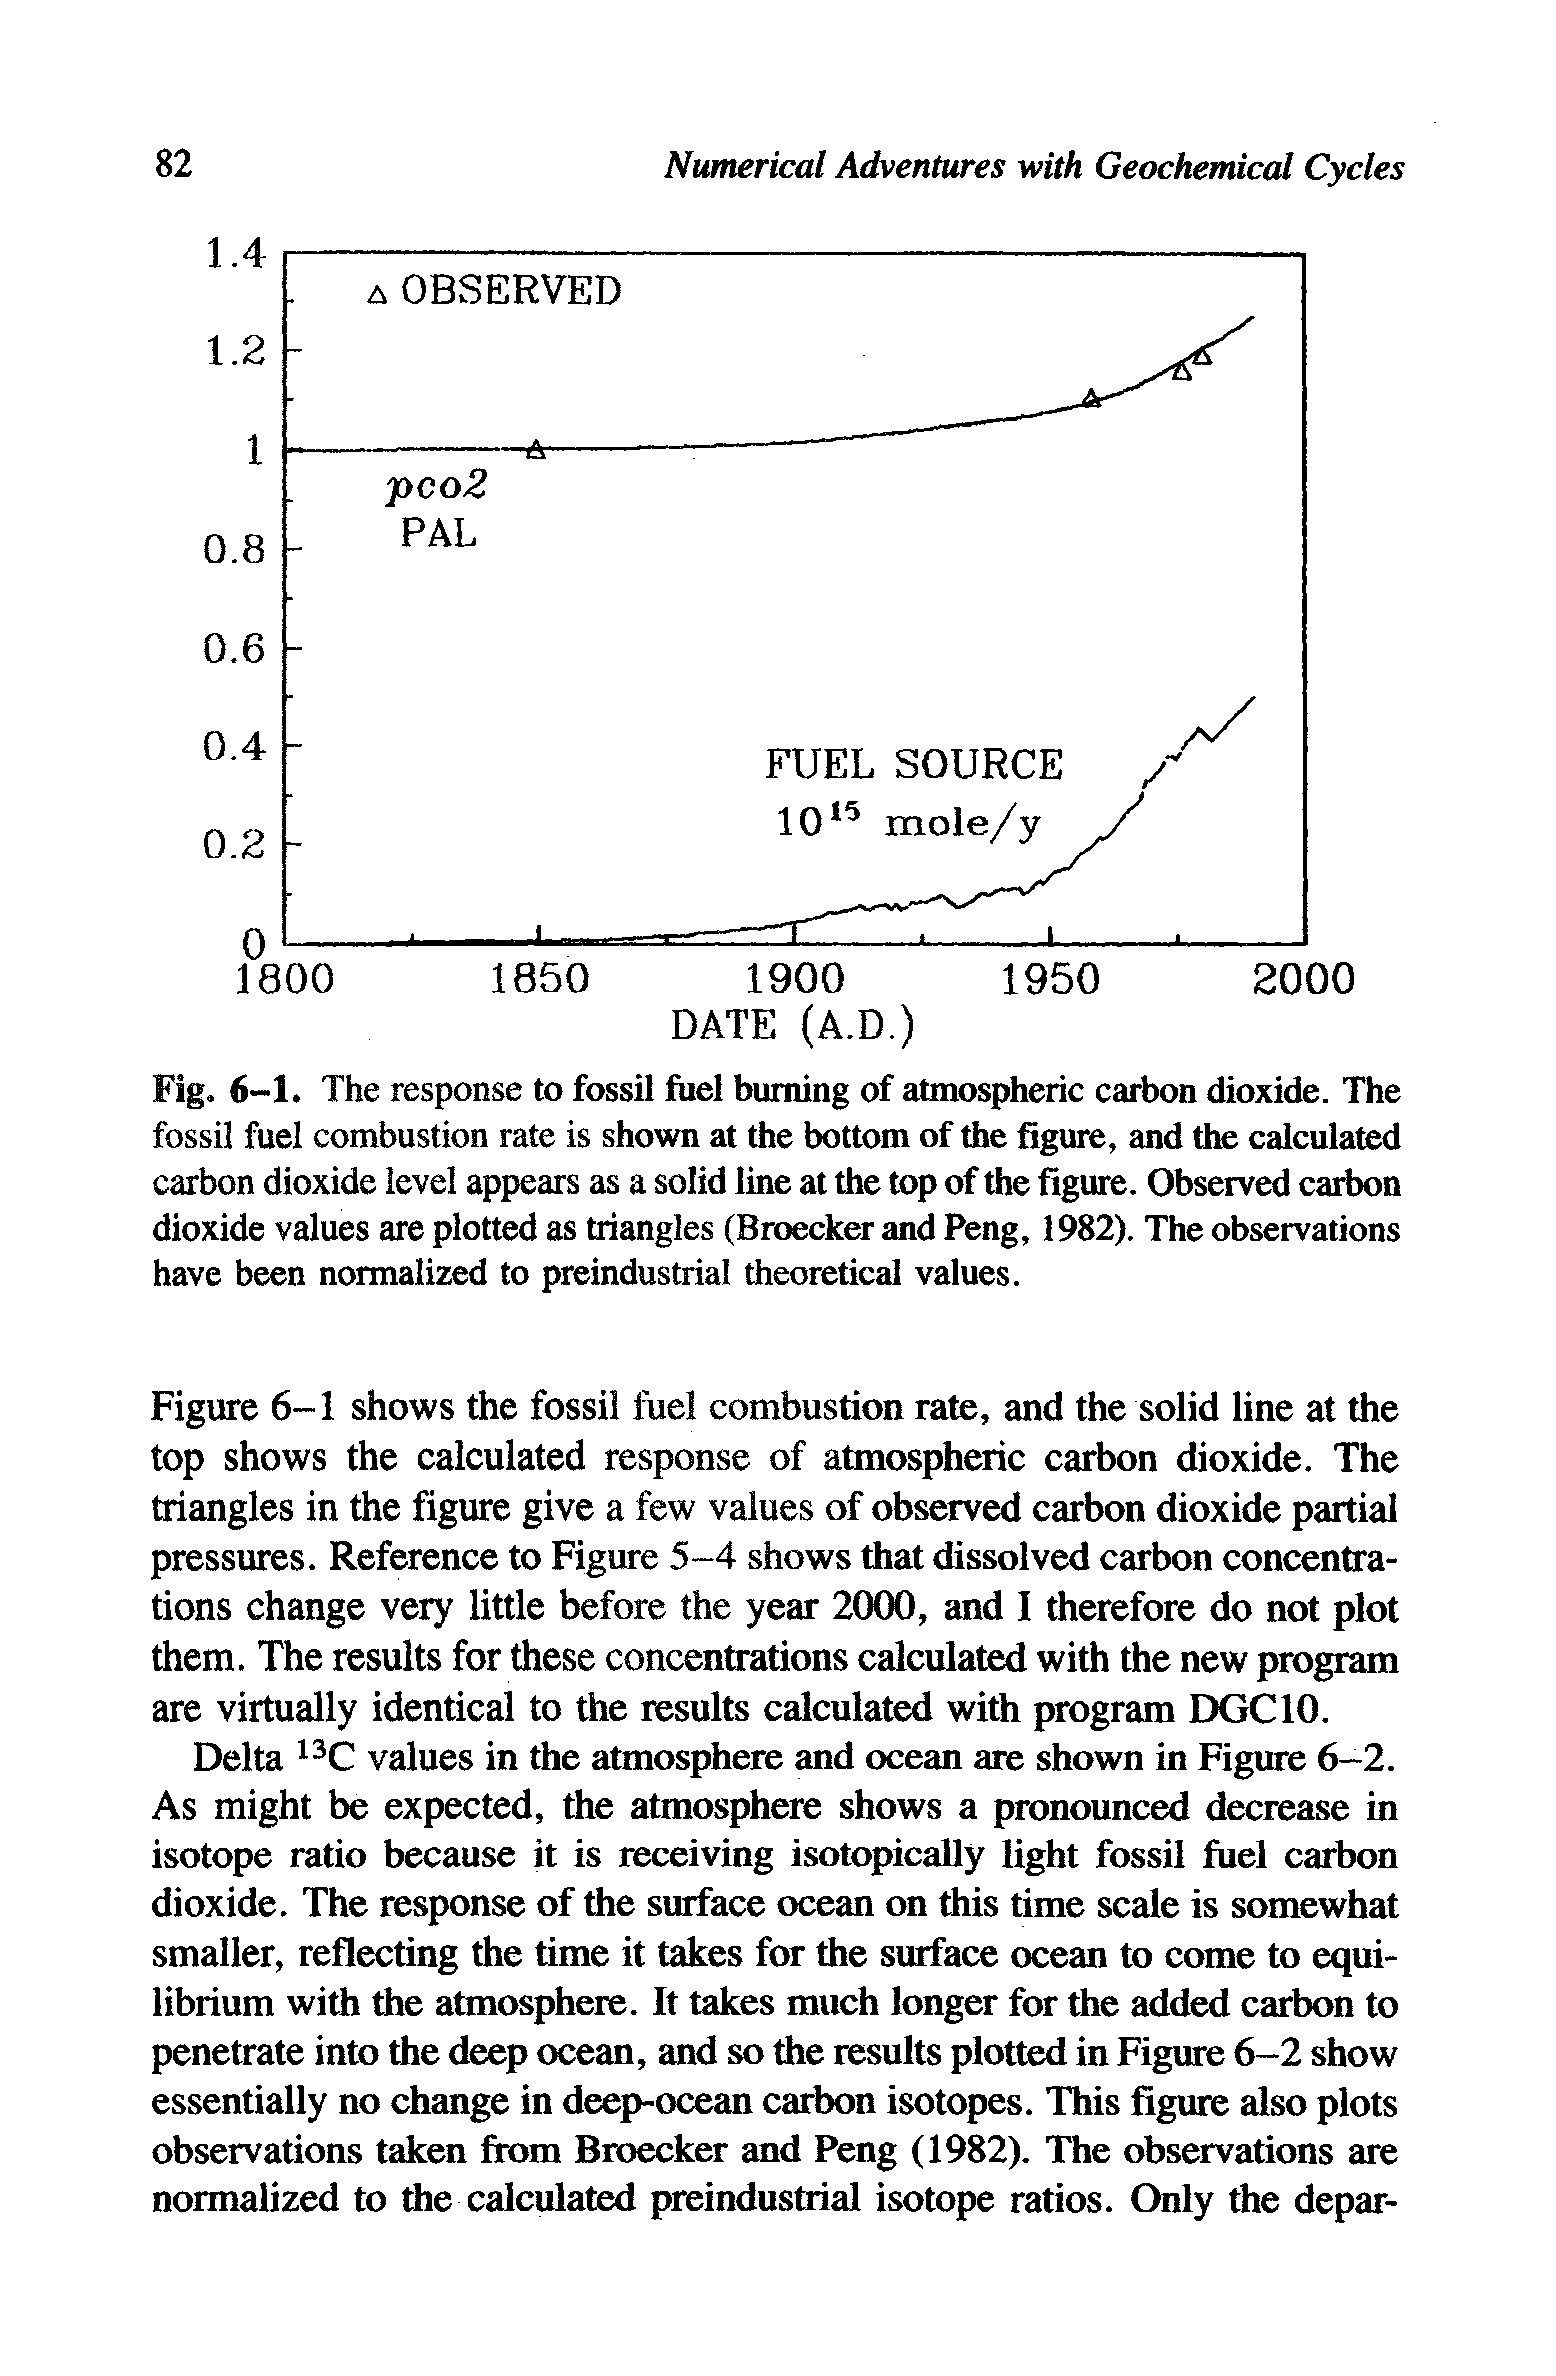 Fig. 6-1. The response to fossil fuel burning of atmospheric carbon dioxide. The fossil fuel combustion rate is shown at the bottom of the figure, and the calculated carbon dioxide level appears as a solid line at the top of the figure. Observed carbon dioxide values are plotted as triangles (Broecker and Peng, 1982). The observations have been normalized to preindustrial theoretical values.